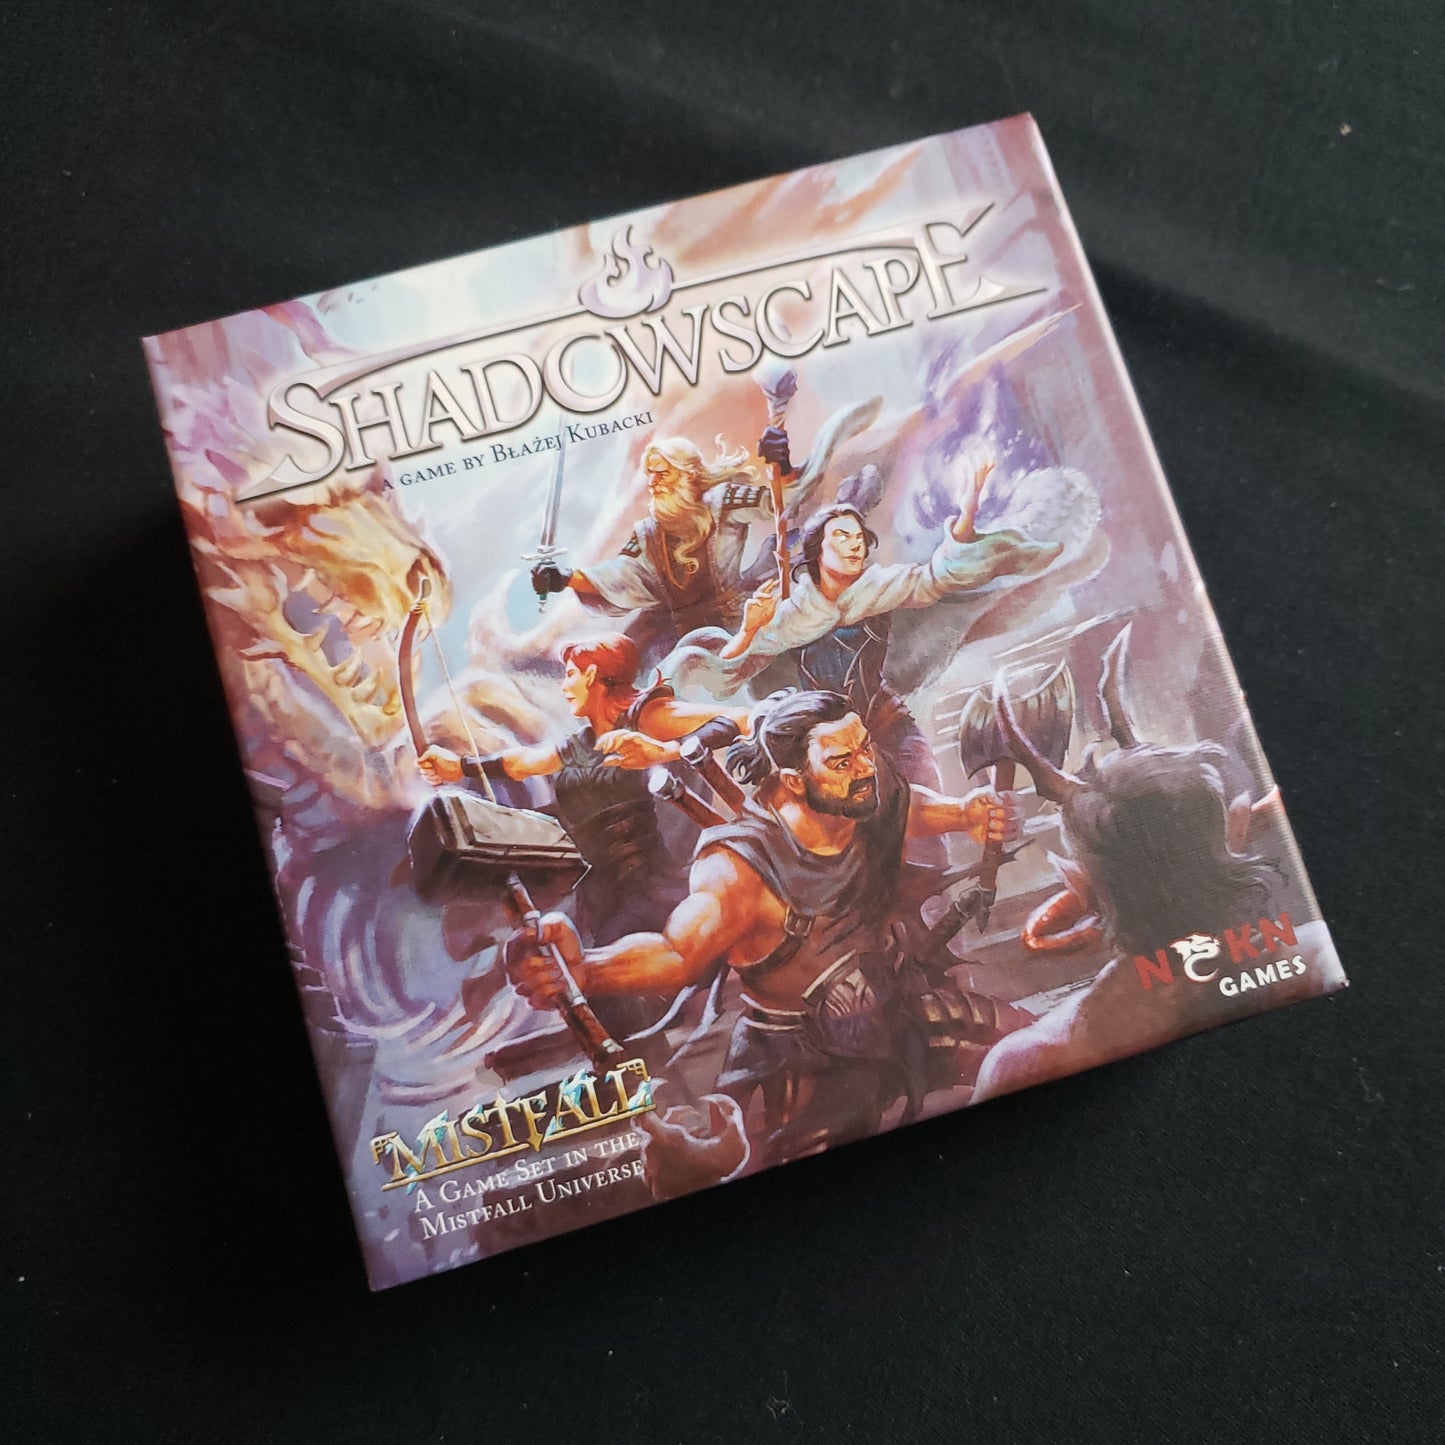 Image shows the front cover of the box of the Shadowscape board game